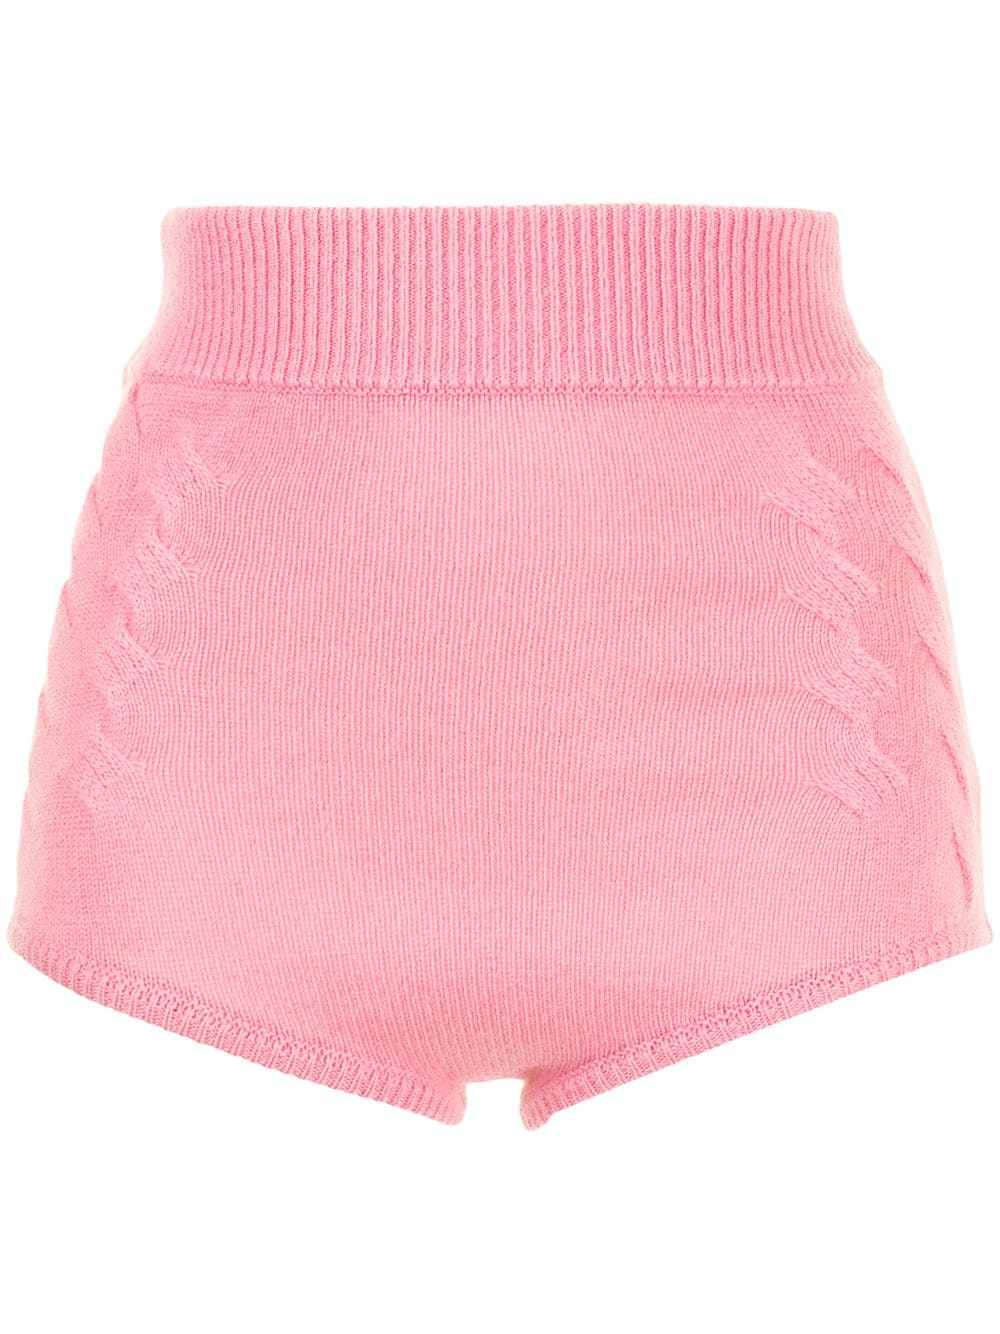 Cashmere In Love Mimie high-waisted cashmere shorts - Pink von Cashmere In Love